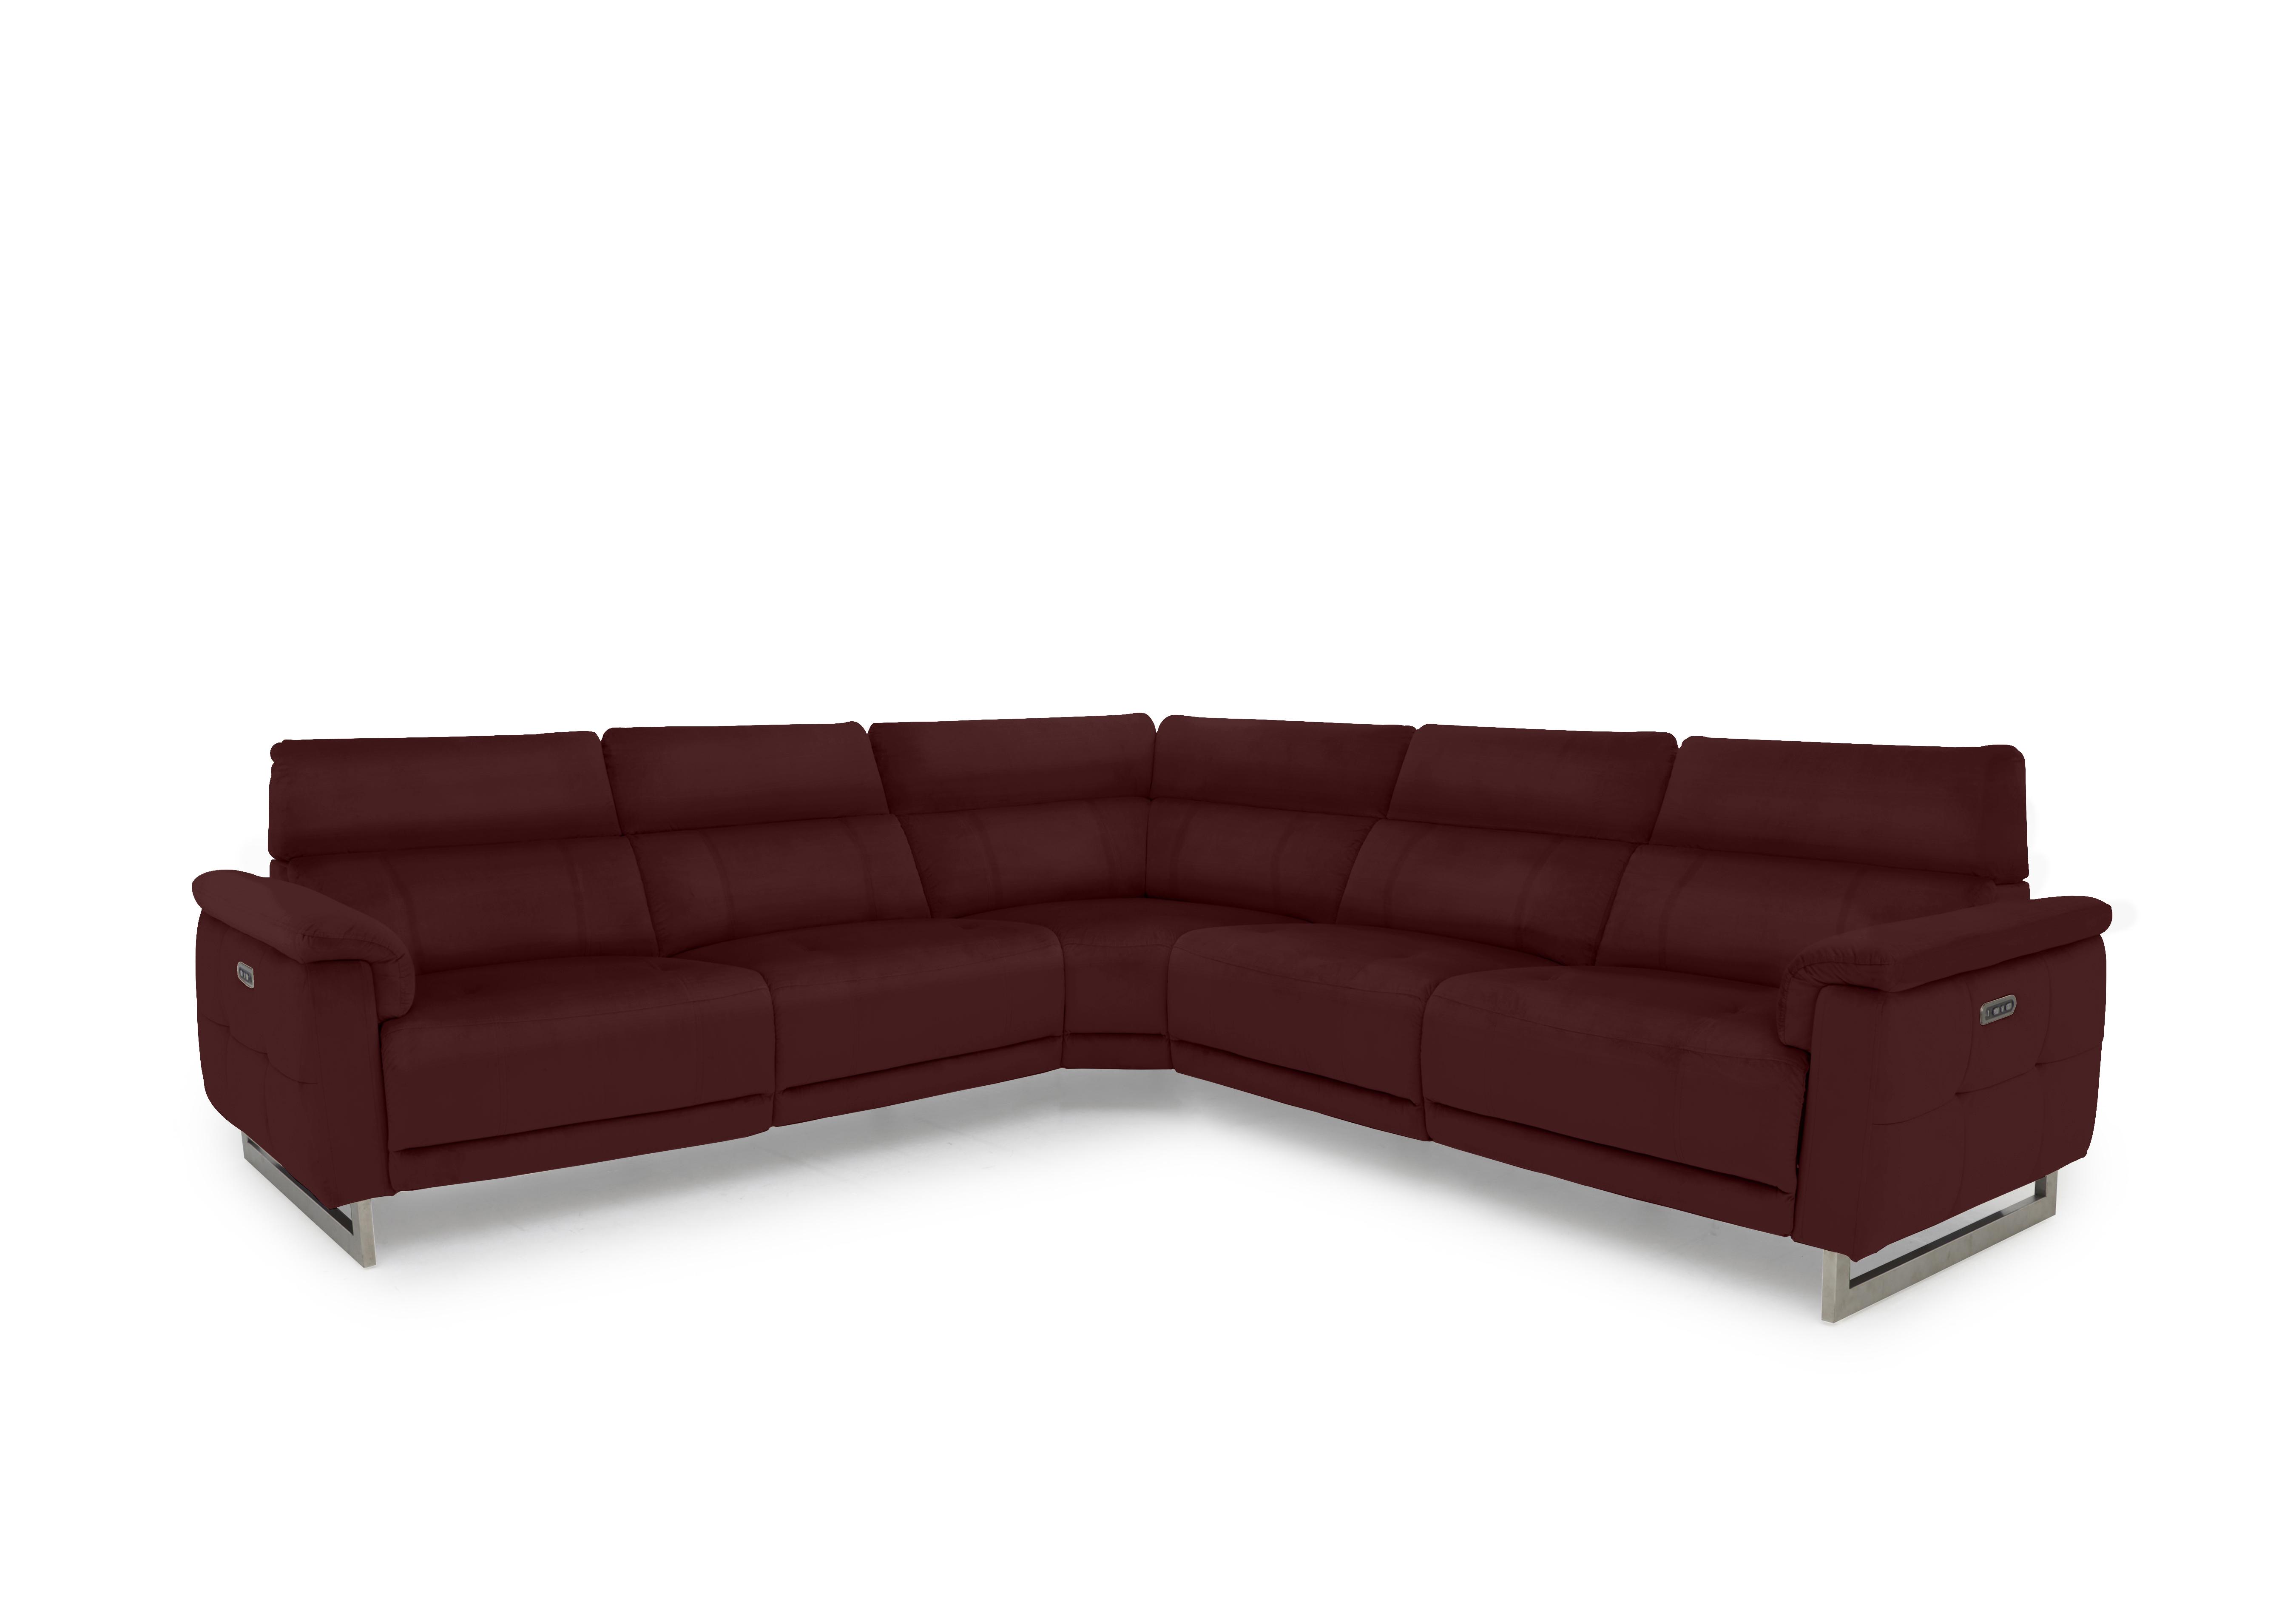 Moet Large Leather Power Recliner Corner Sofa with Telescopic Headrests in Cat-60/15 Ruby on Furniture Village